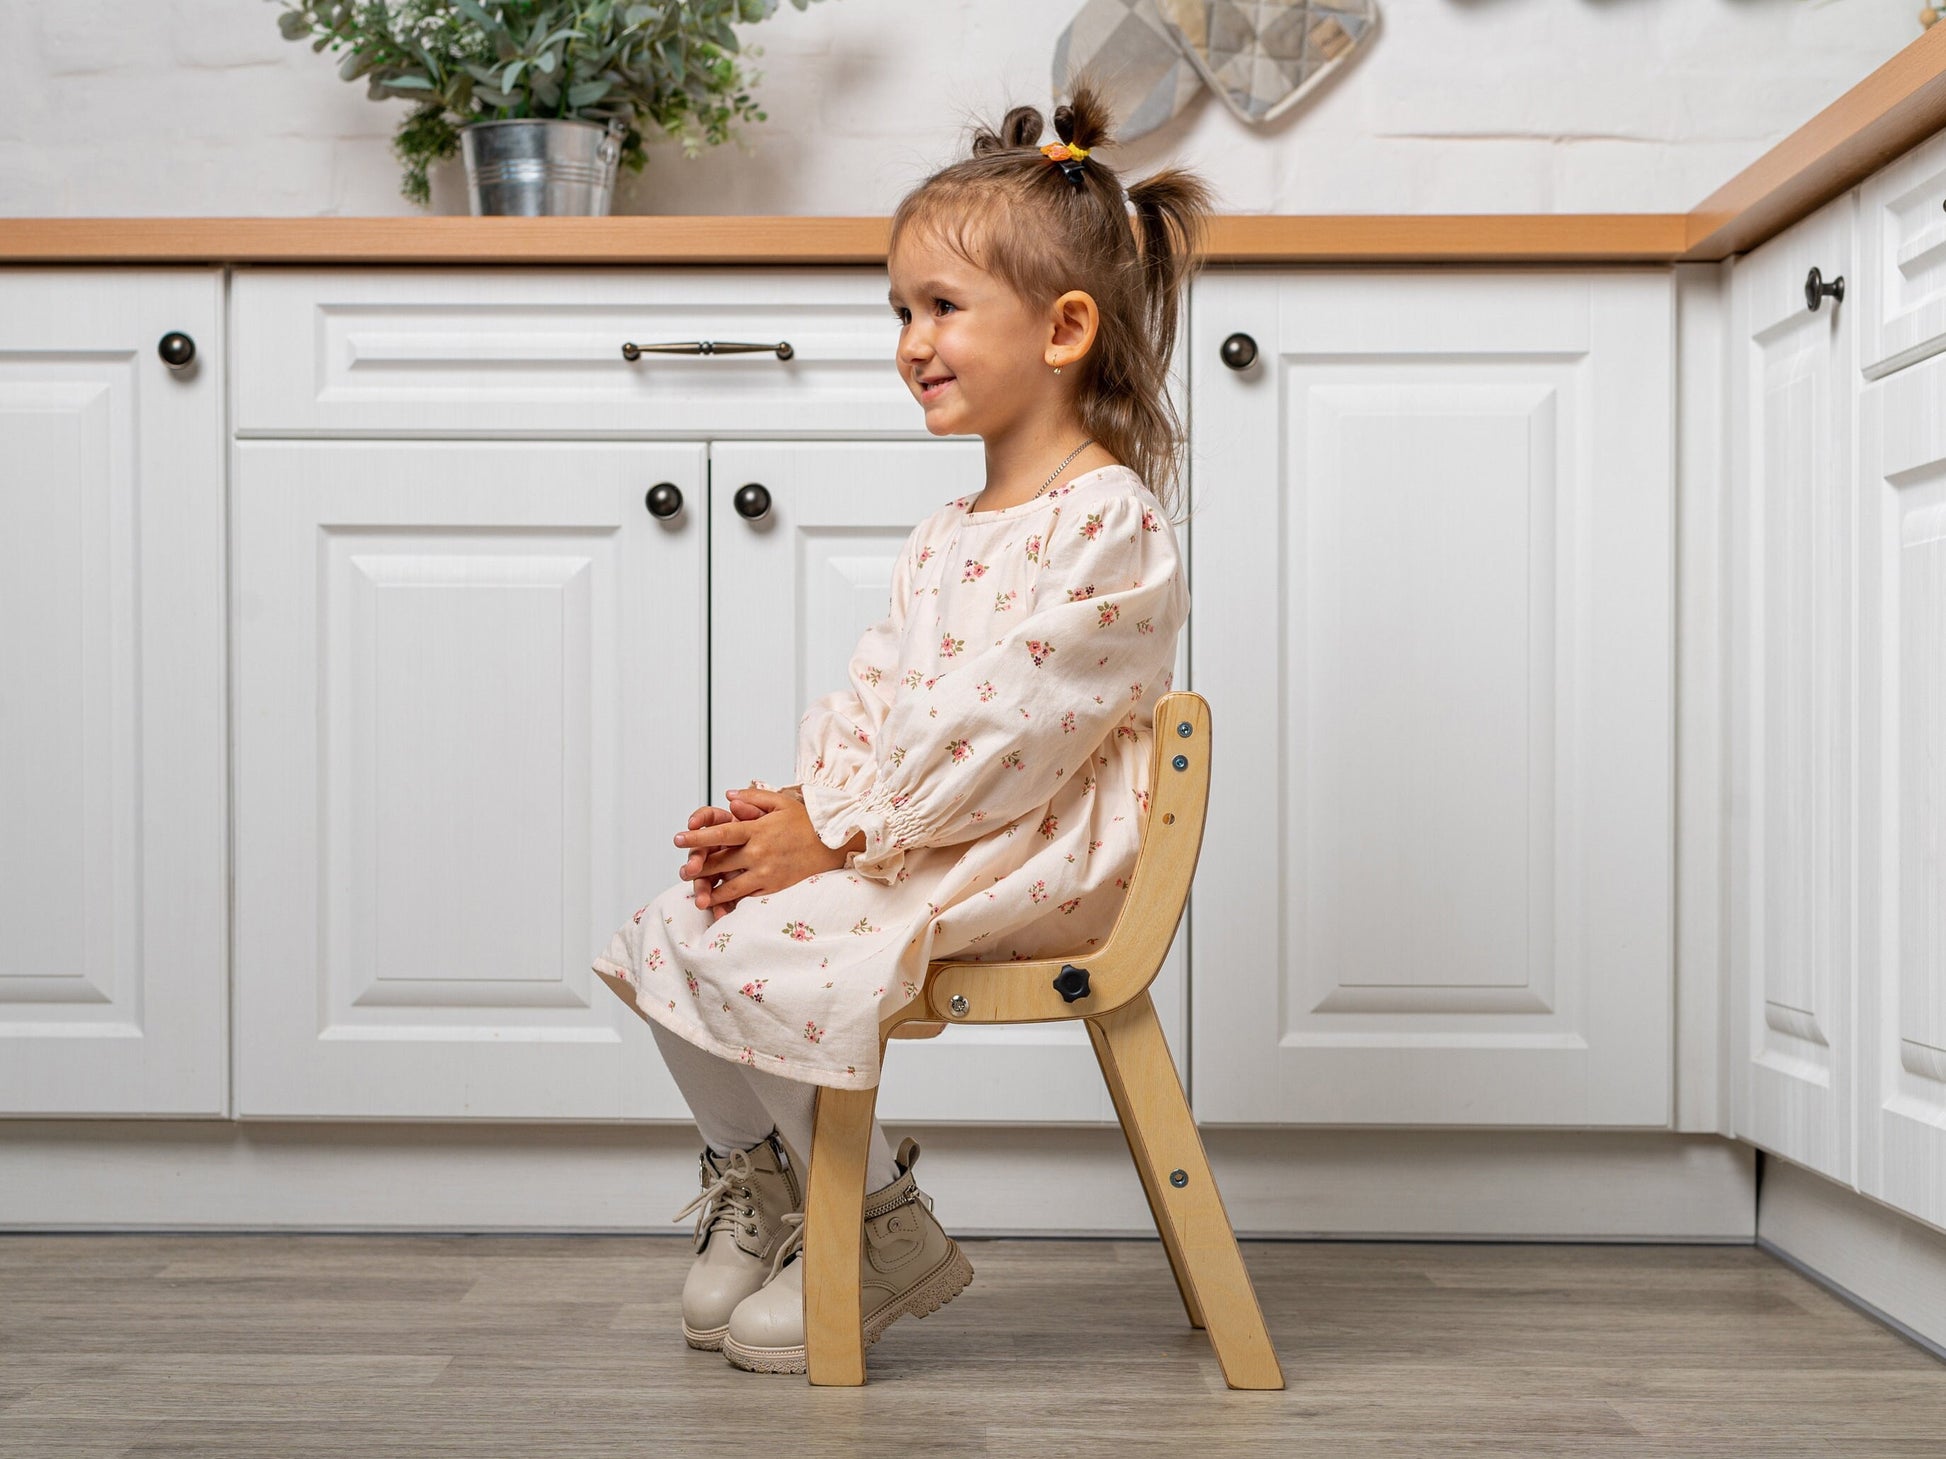 Convertible Step Stool & Chair 2in1, kids kitchen stool